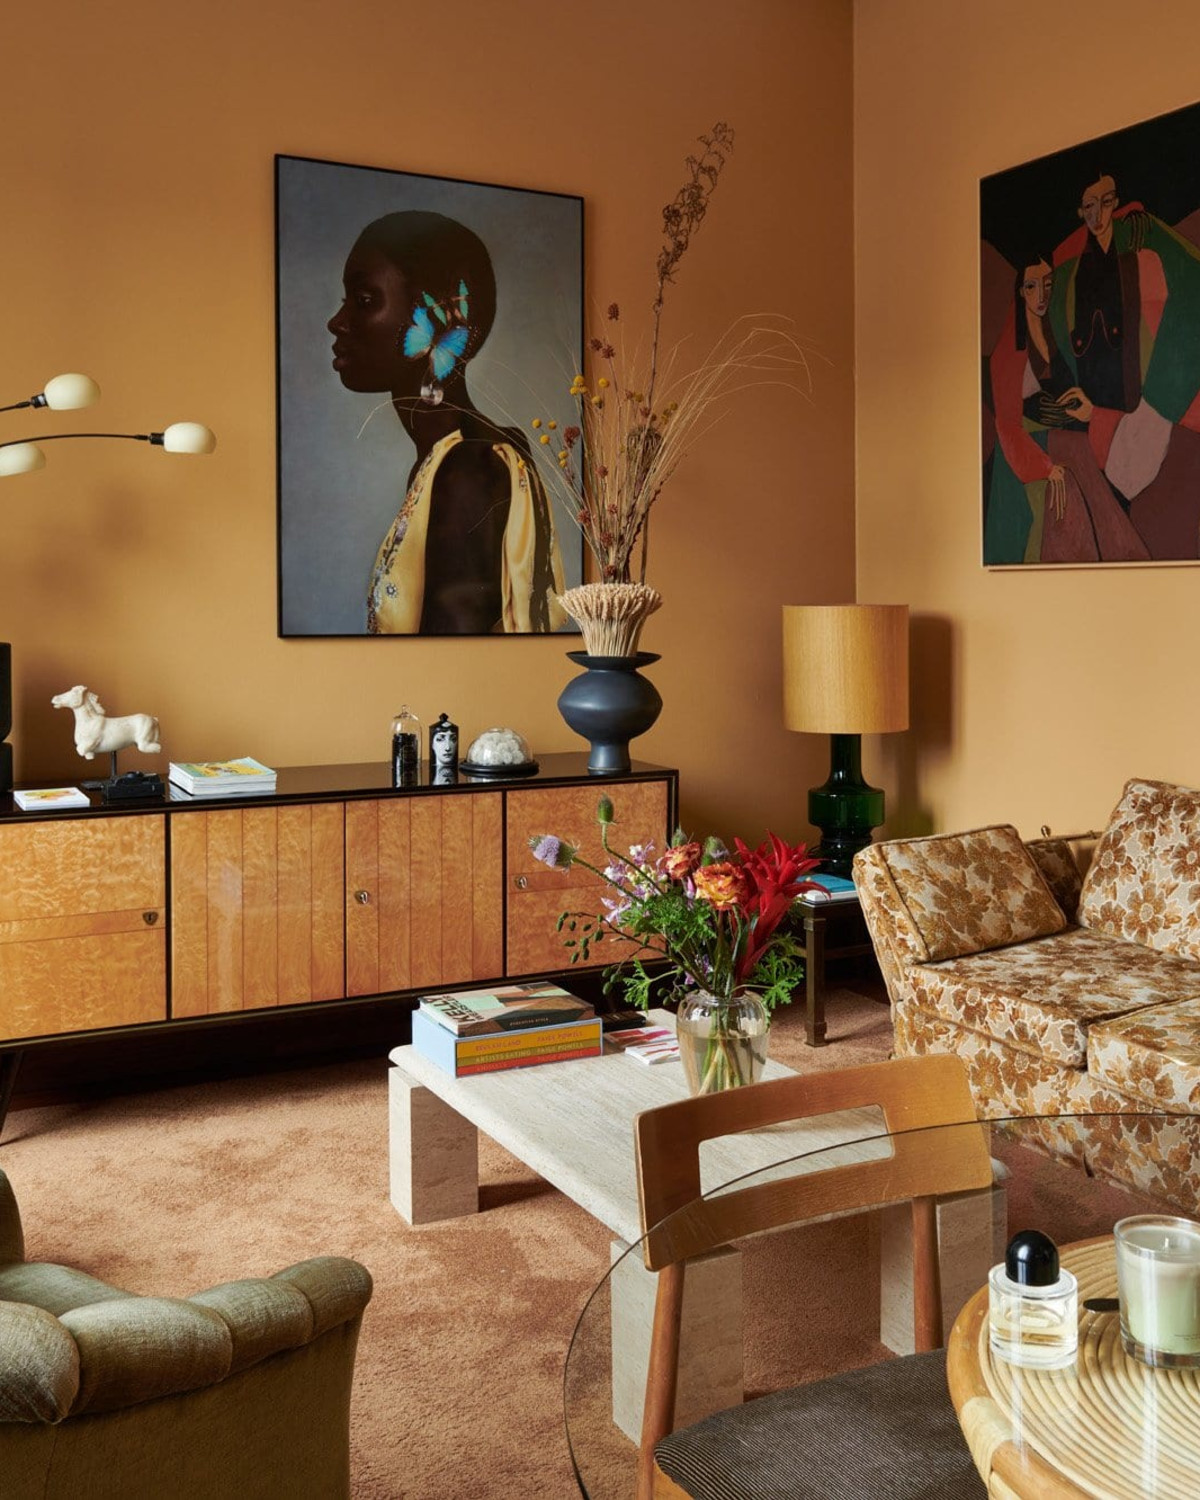 a stylish living room with a patterned couch, yellowish orange walls and colorful artwork